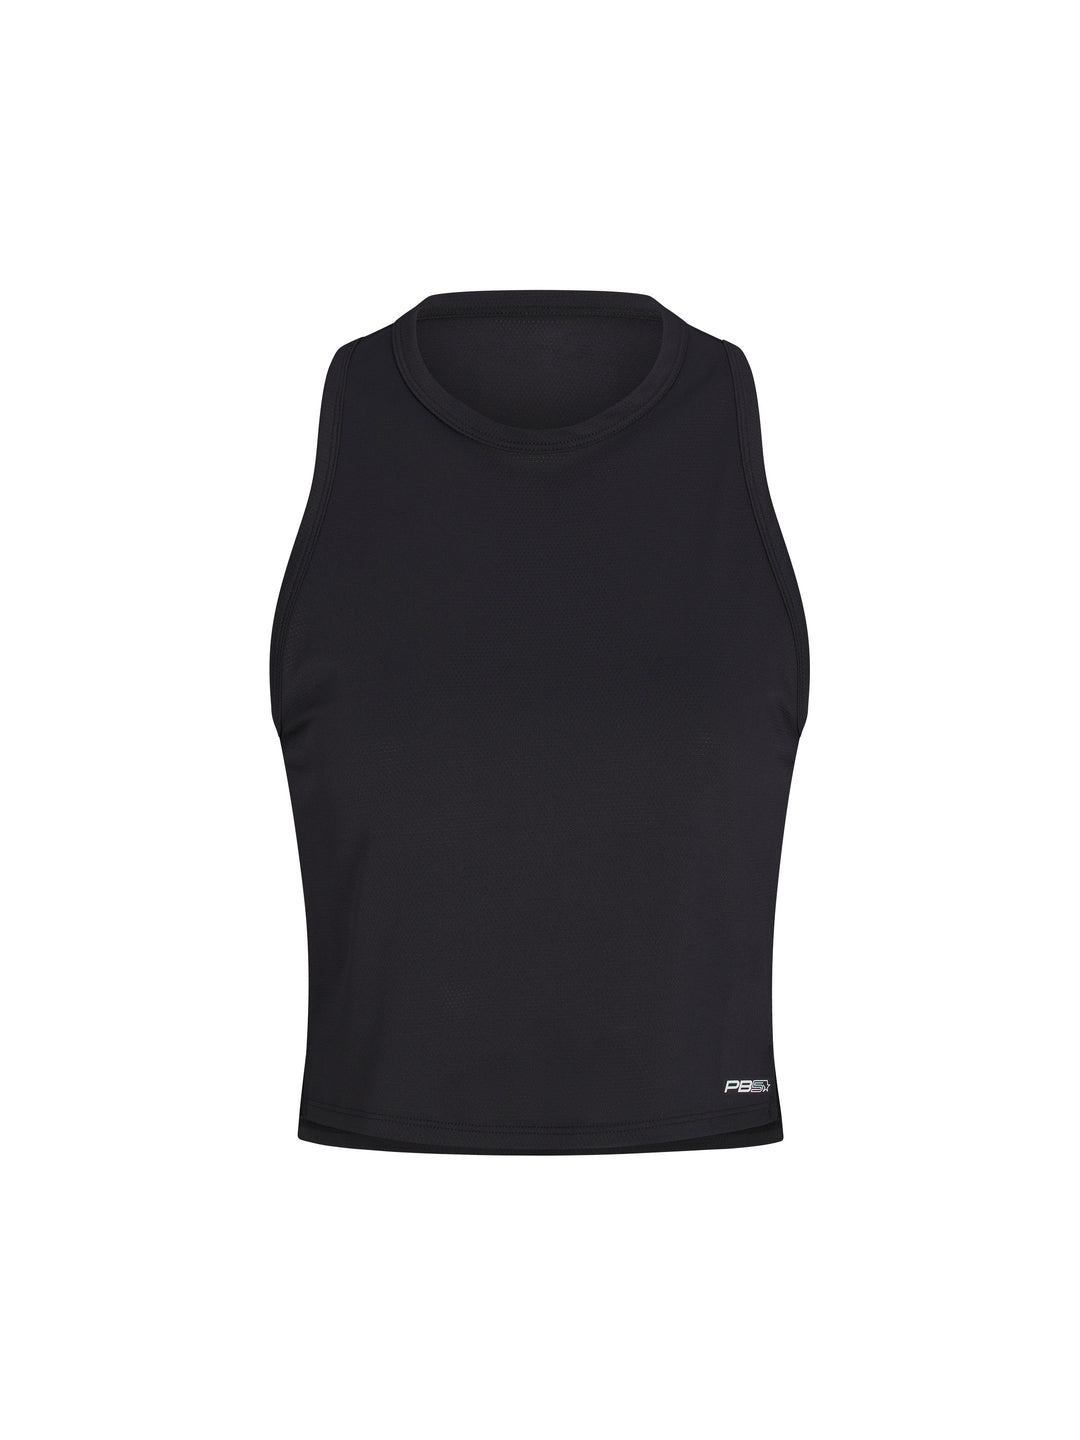 Women's Cropped Racer Back Tank front view in black with high neck line. Small logo on lower left side.